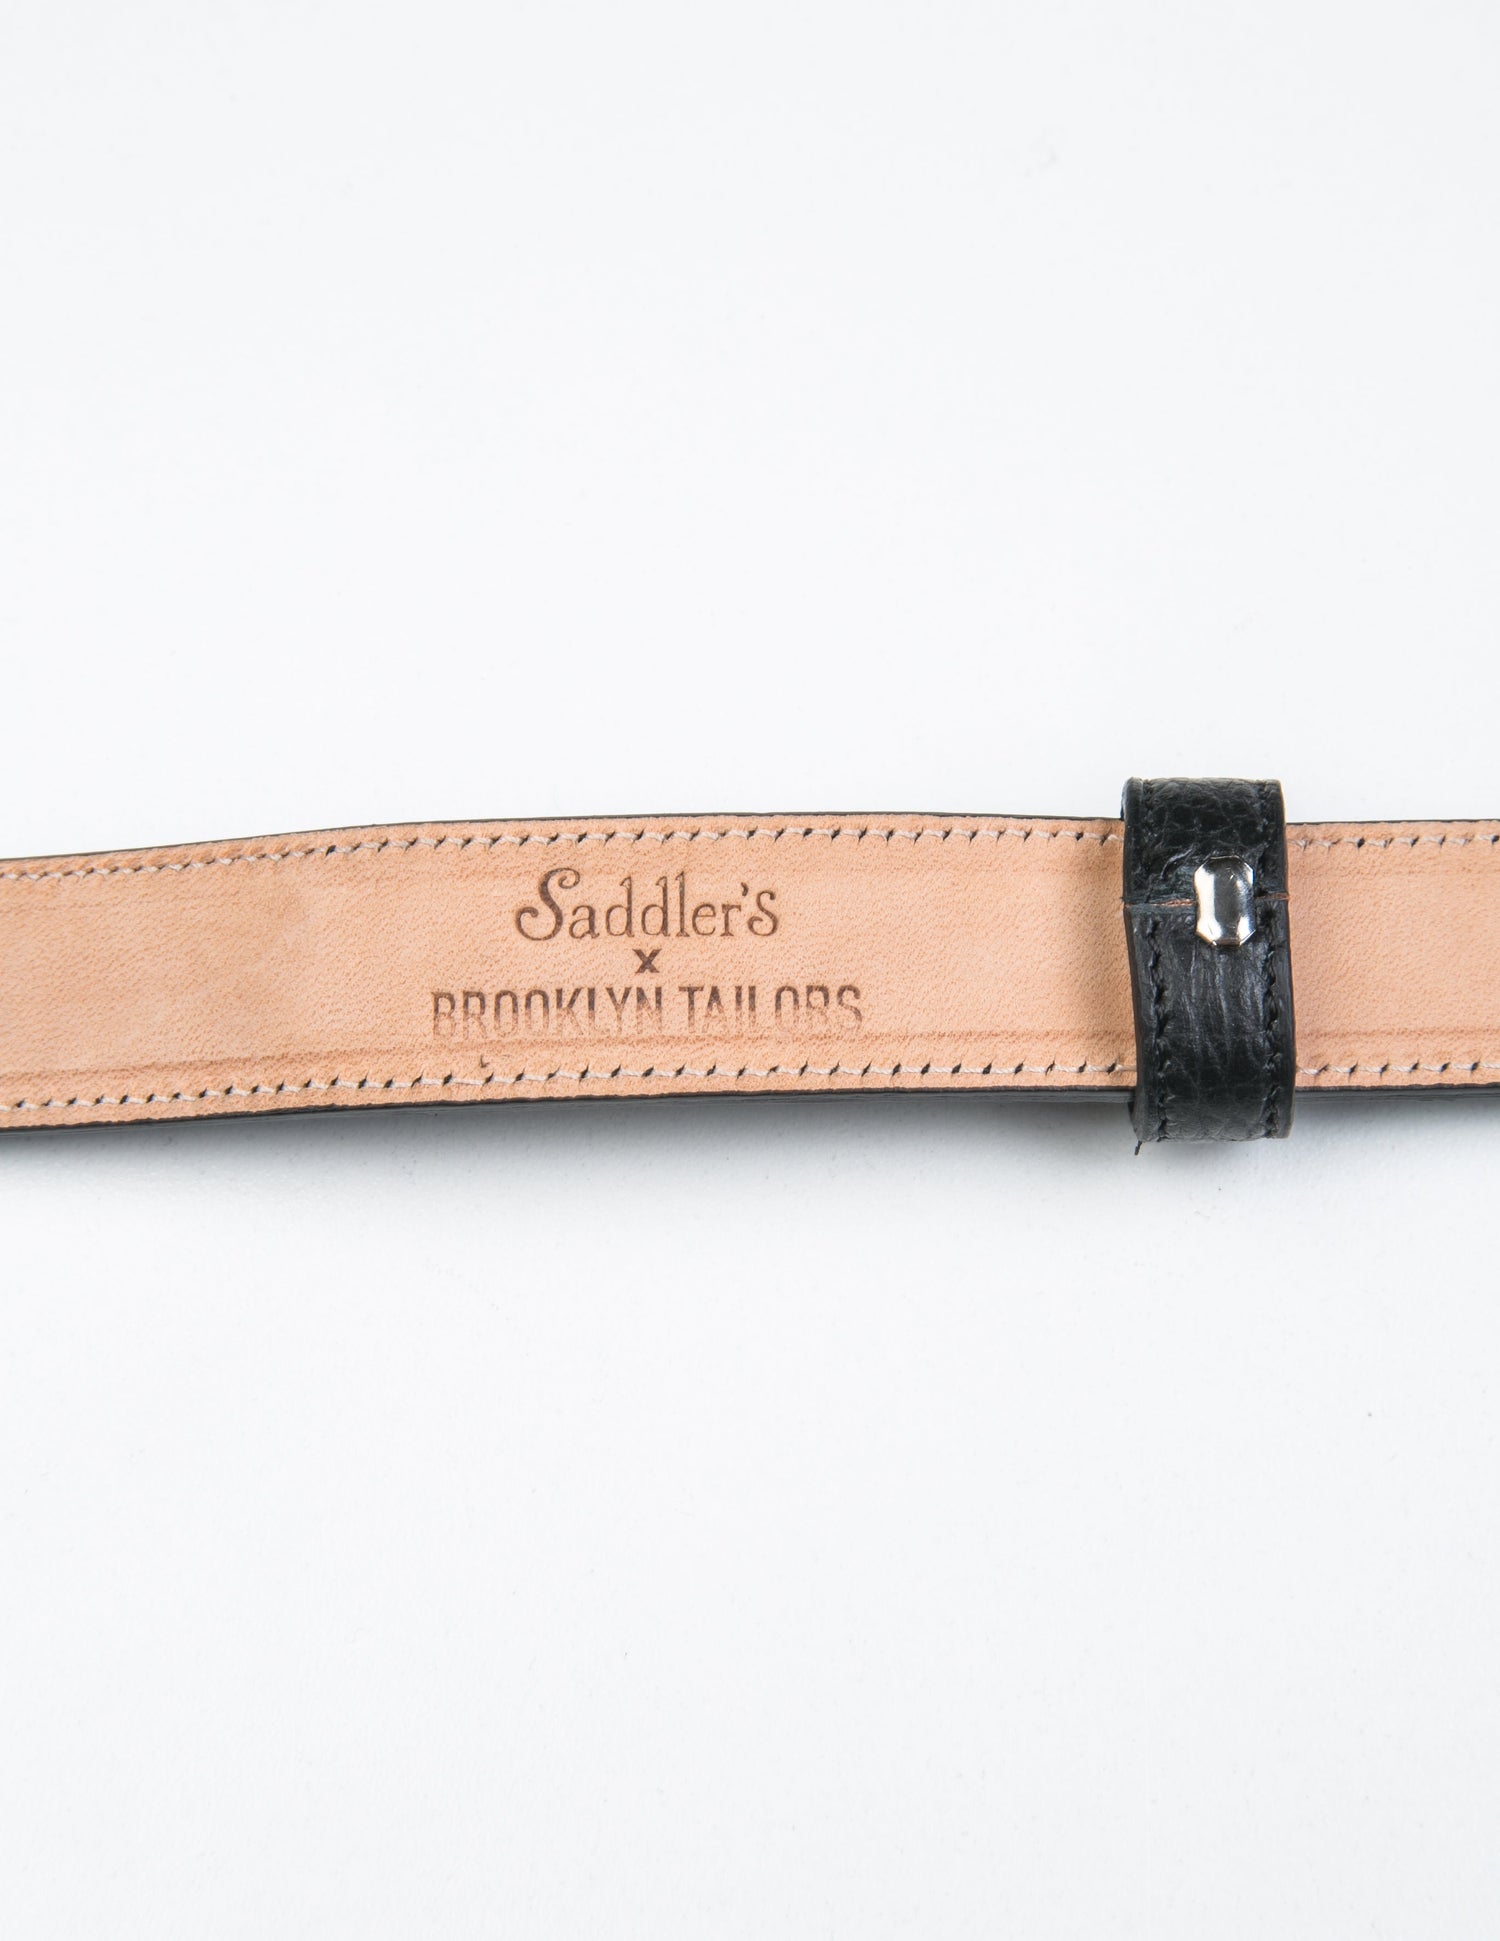 Detail of the Brooklyn Tailors x Saddler's stamp on the underside of the 25mm Belt in Grain Leather - Black